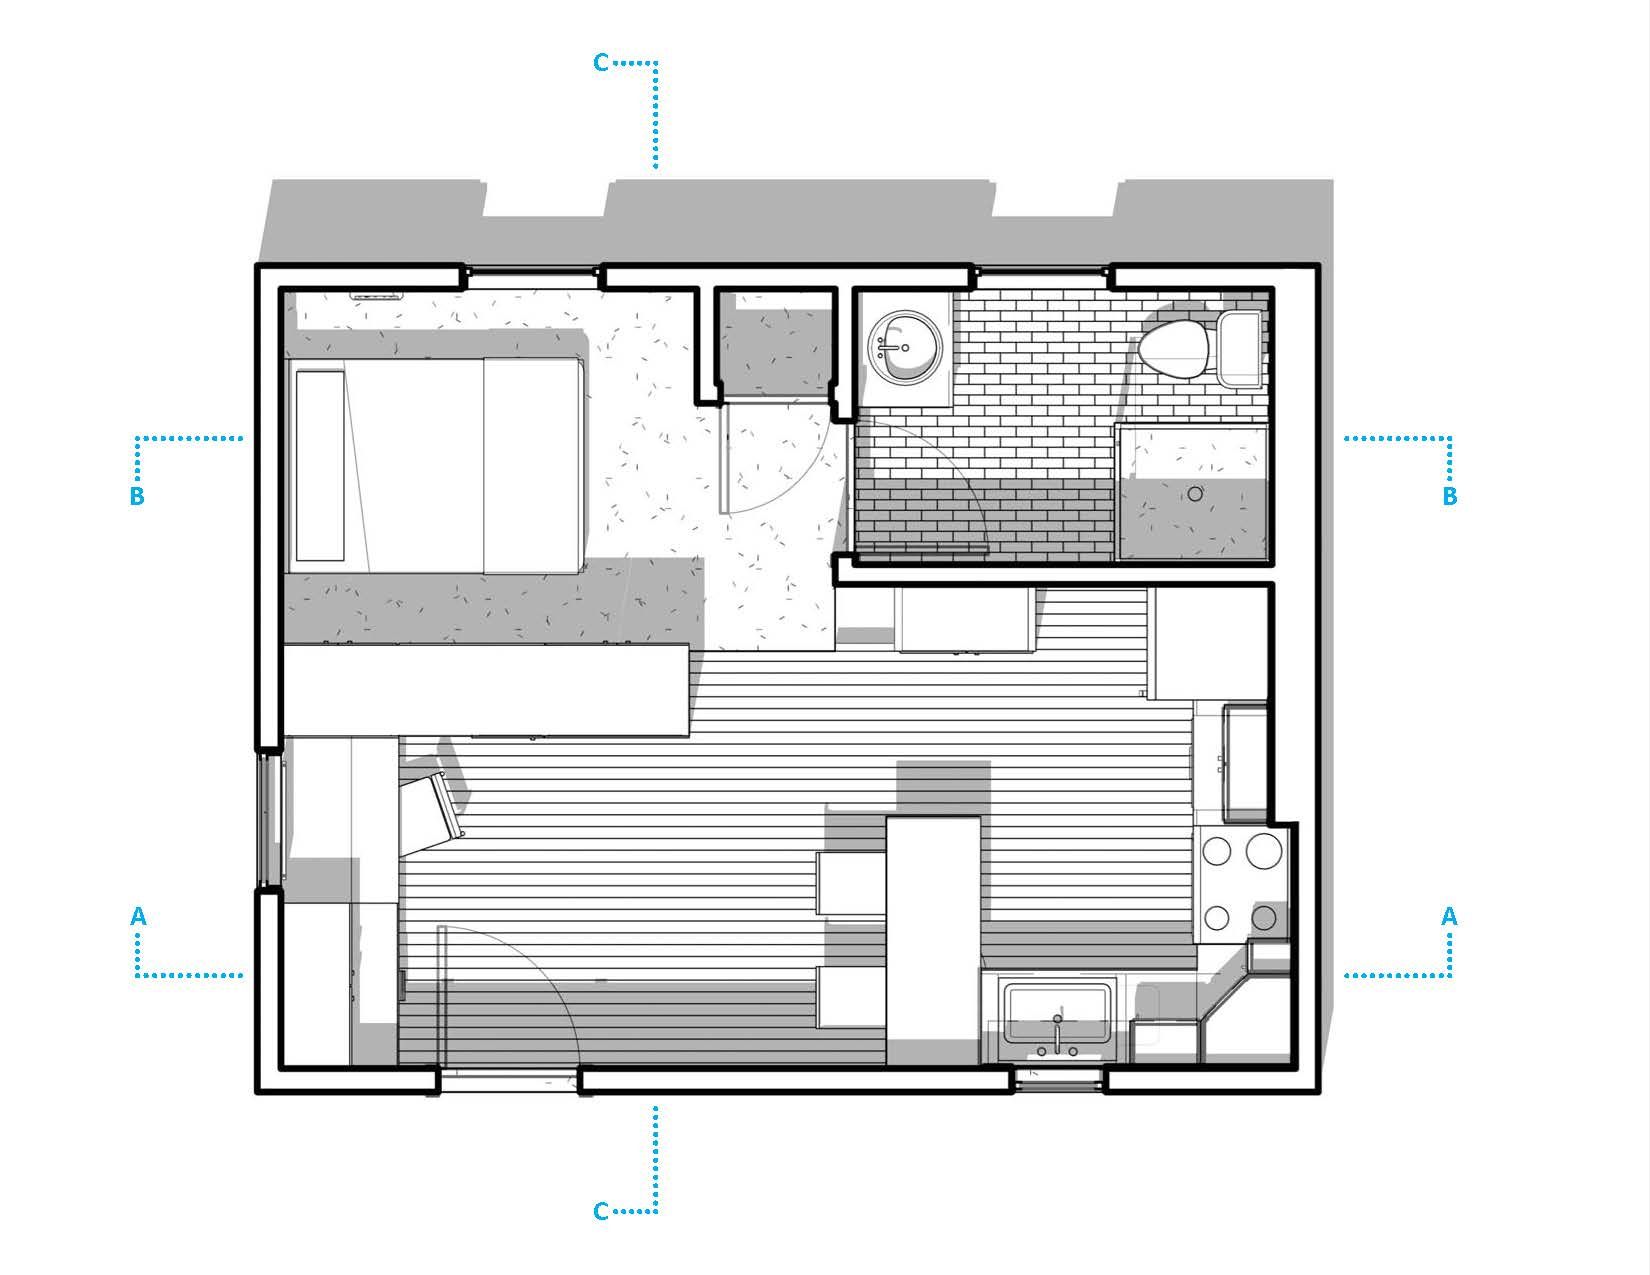 300 Sq FT Apartment Layout Mulberry 300 Sq/ft Studio